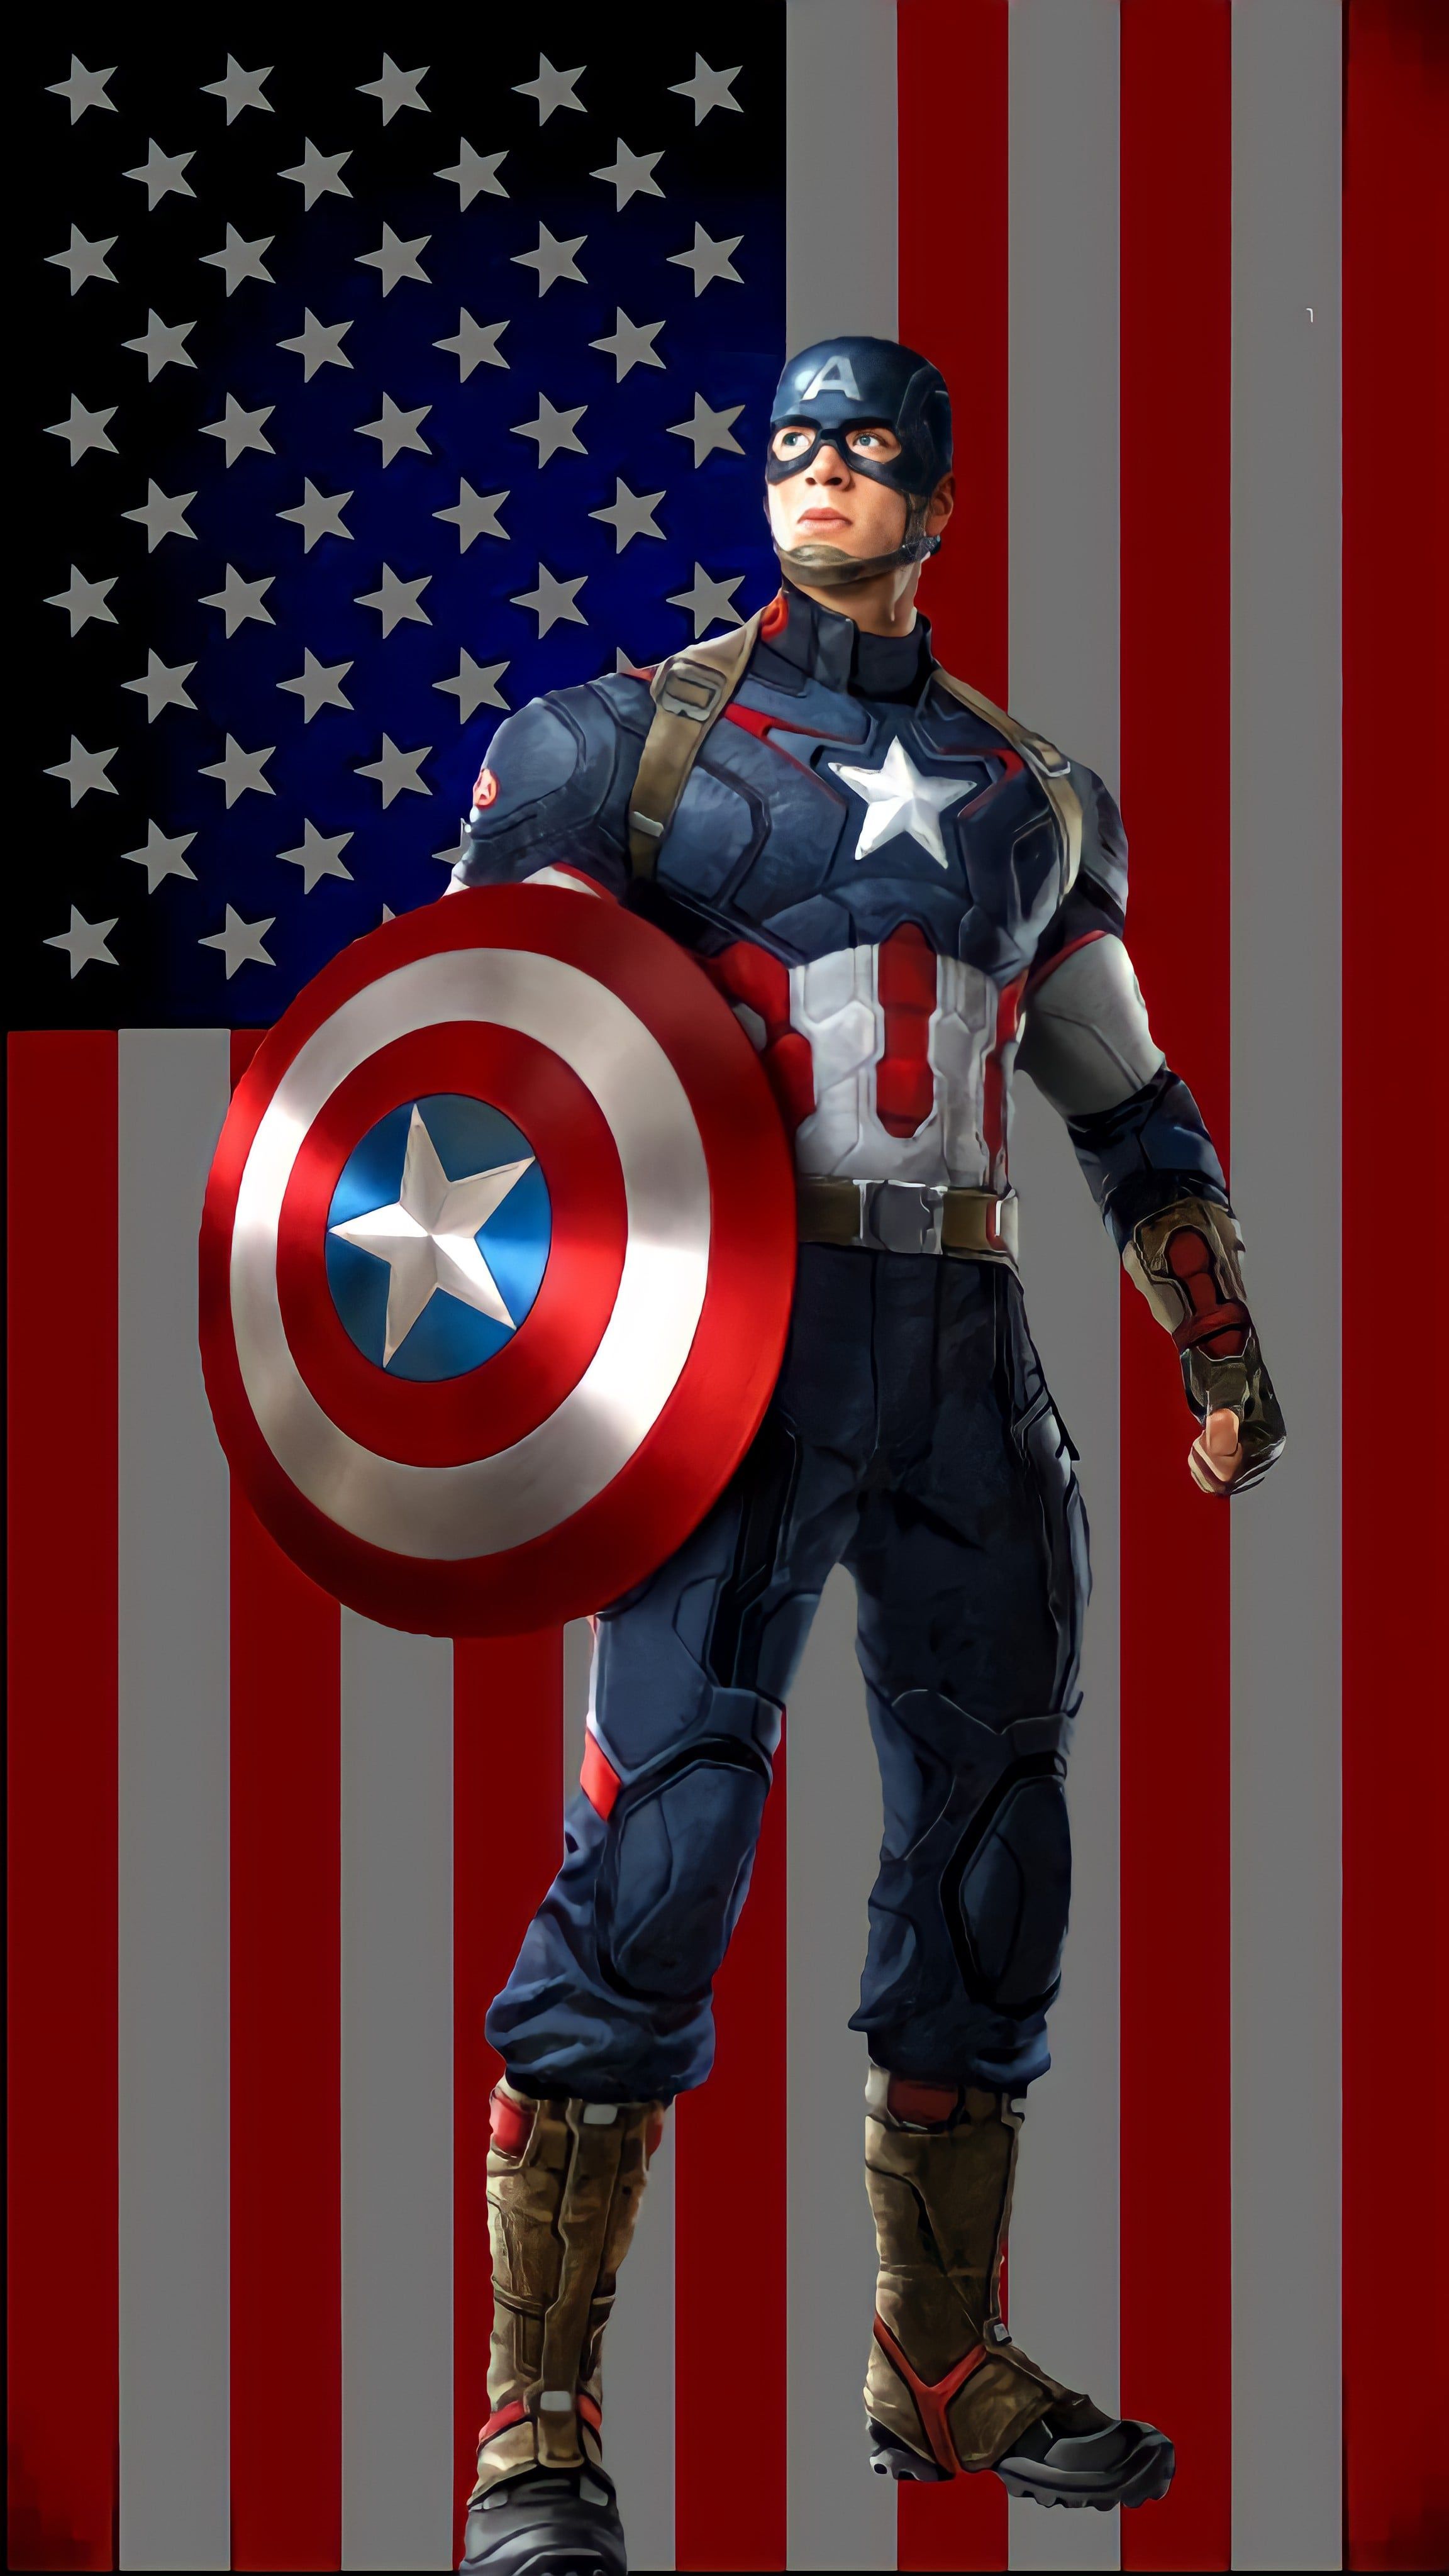 Captain America with the American flag in the background - Captain America